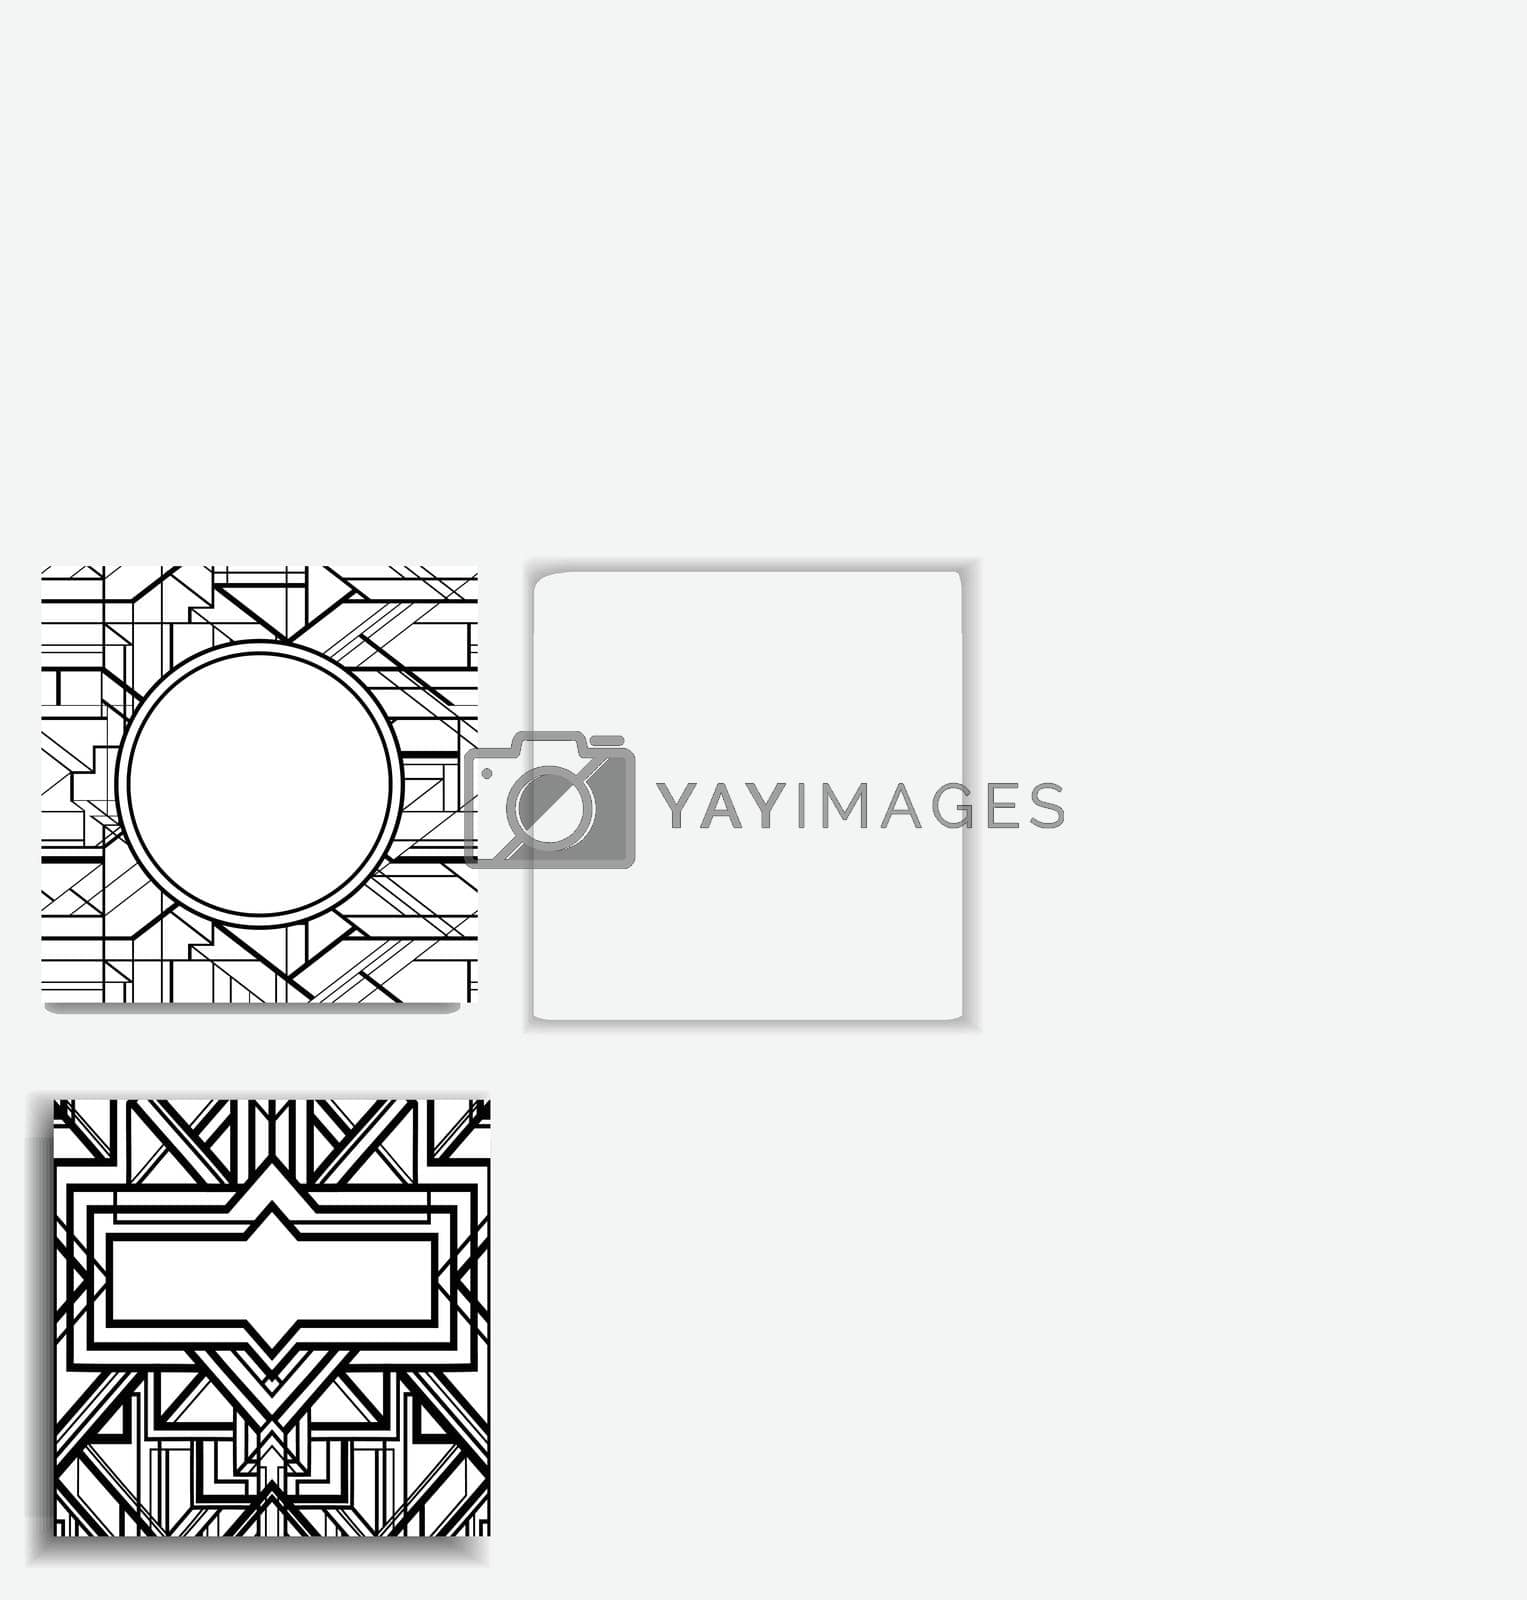 Royalty free image of Art Deco vintage patterns and design elements. Retro party geometric background set (1920's style). Vector illustration for glamour party, thematic wedding or textile prints by varka